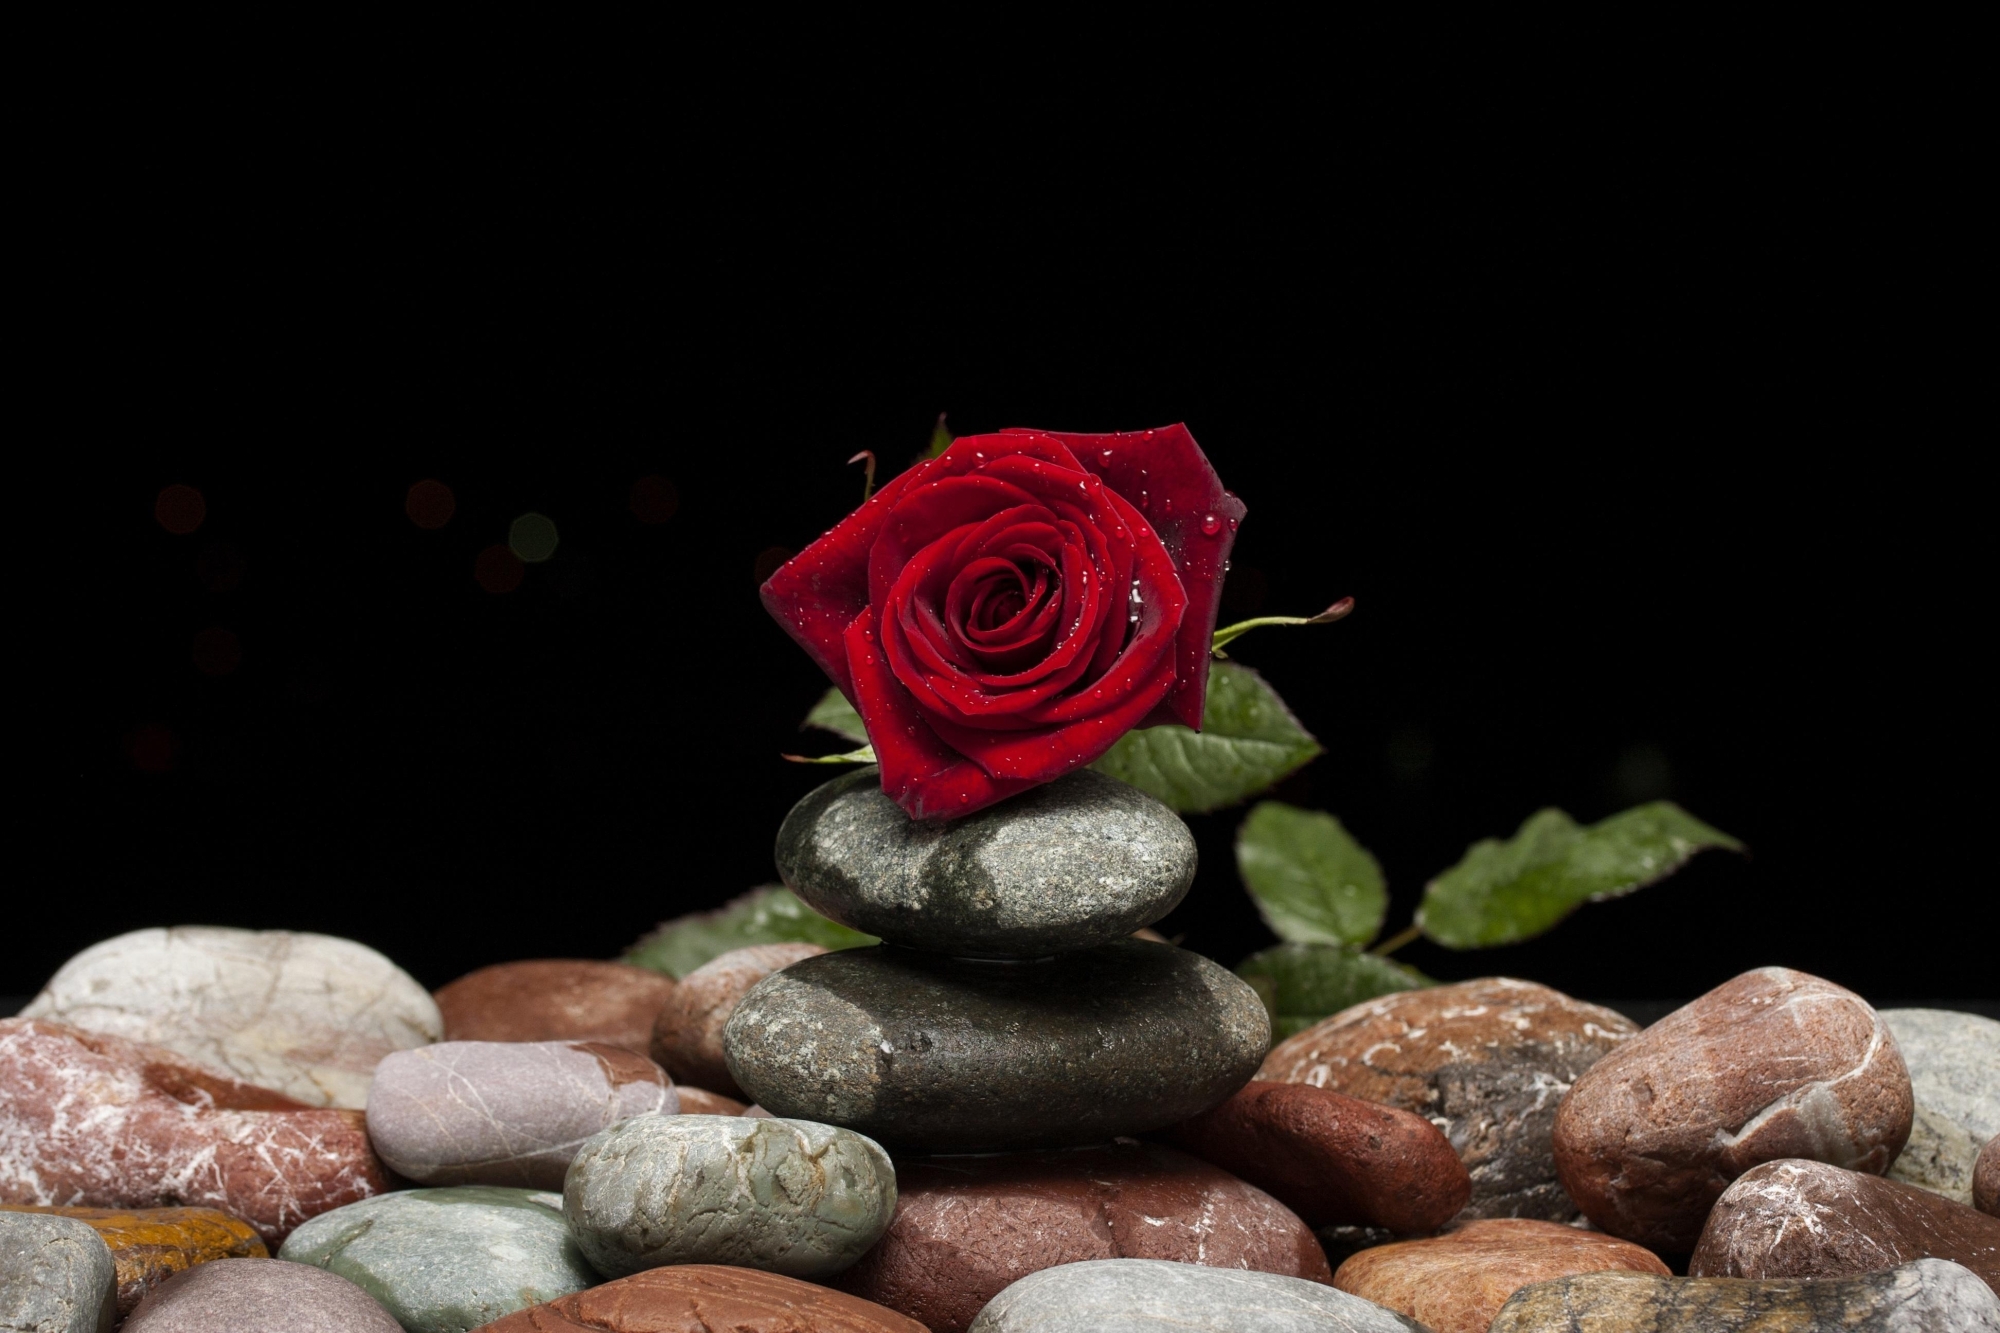 image of a single red rose bloom on a heap of pebbles